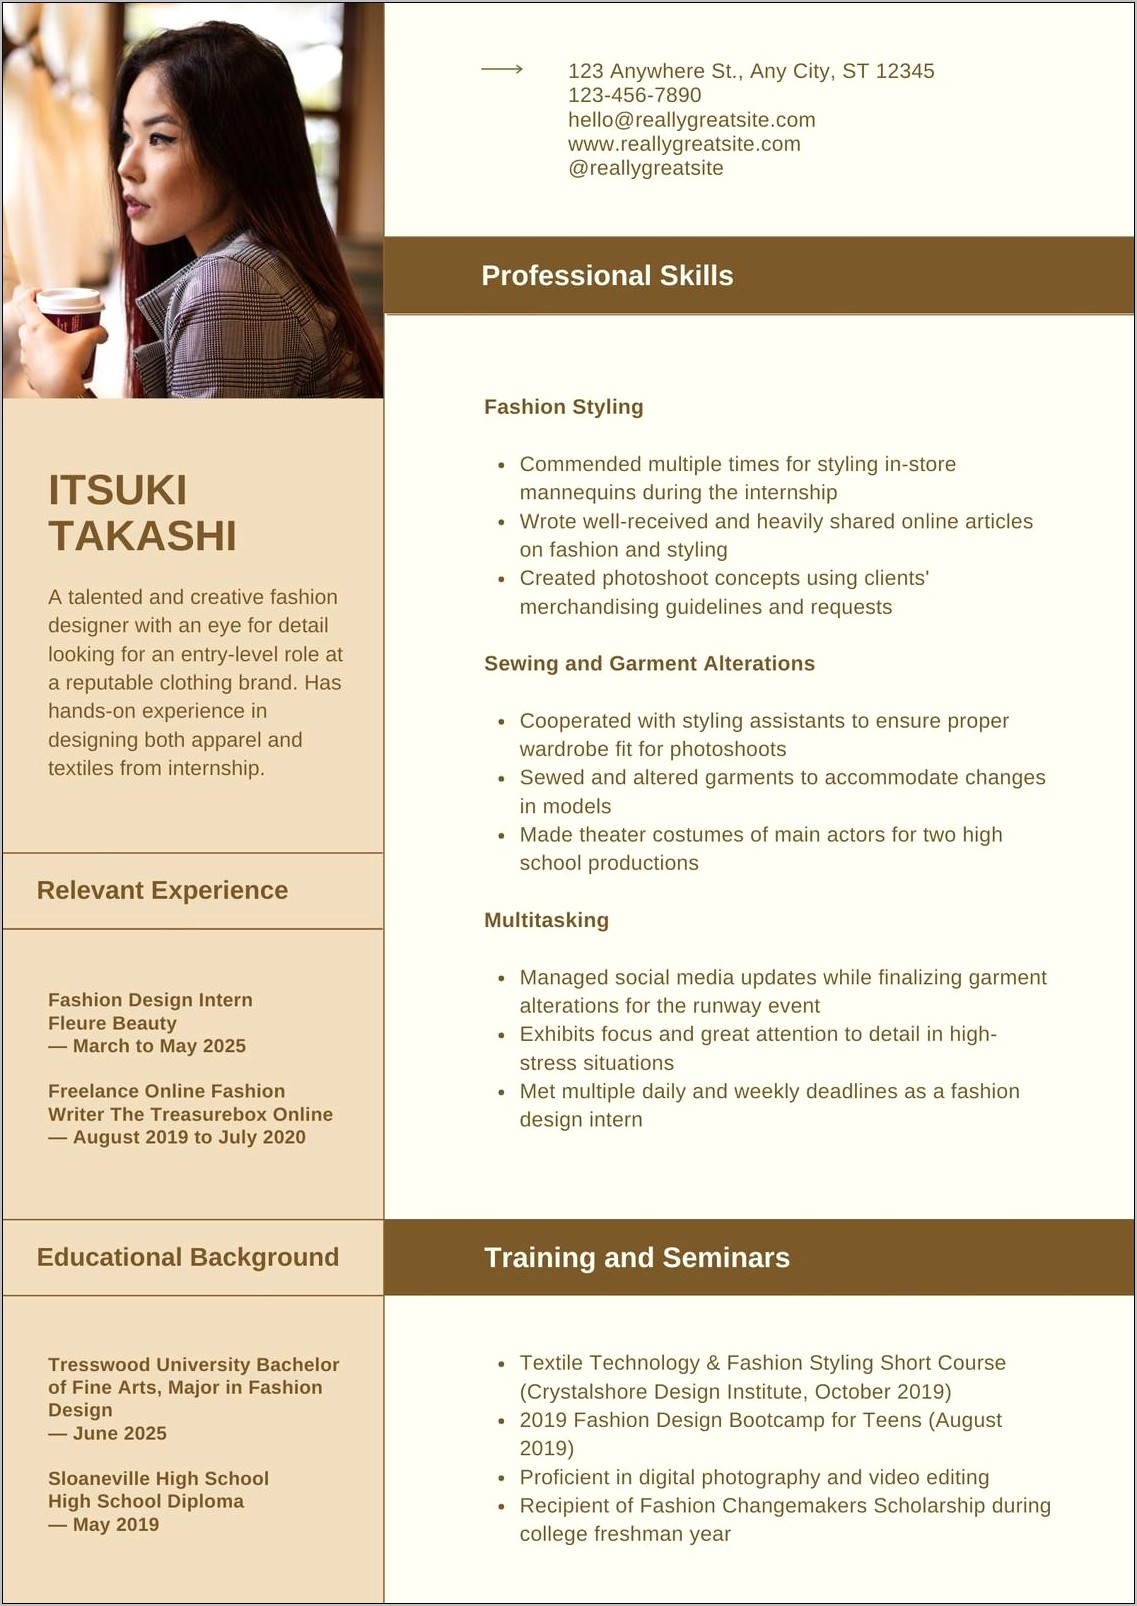 Example Resume For Internship In Malaysia